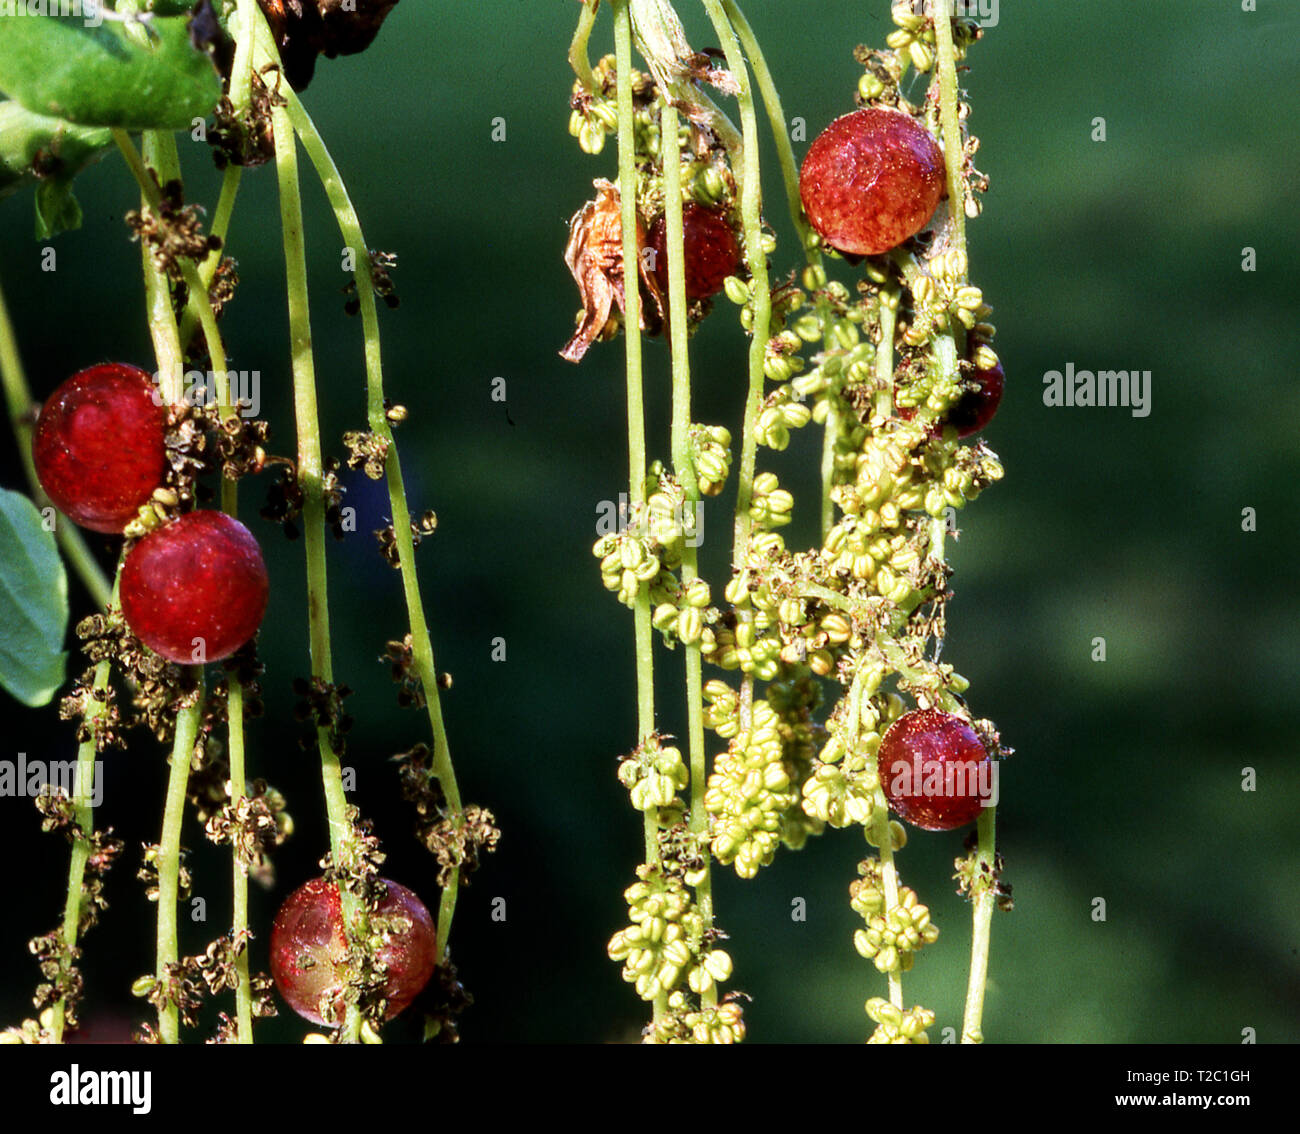 CURRENT GALL (NEOROTERUS  QUERCUS BACCARUM) ON OAK CATKKINS Stock Photo